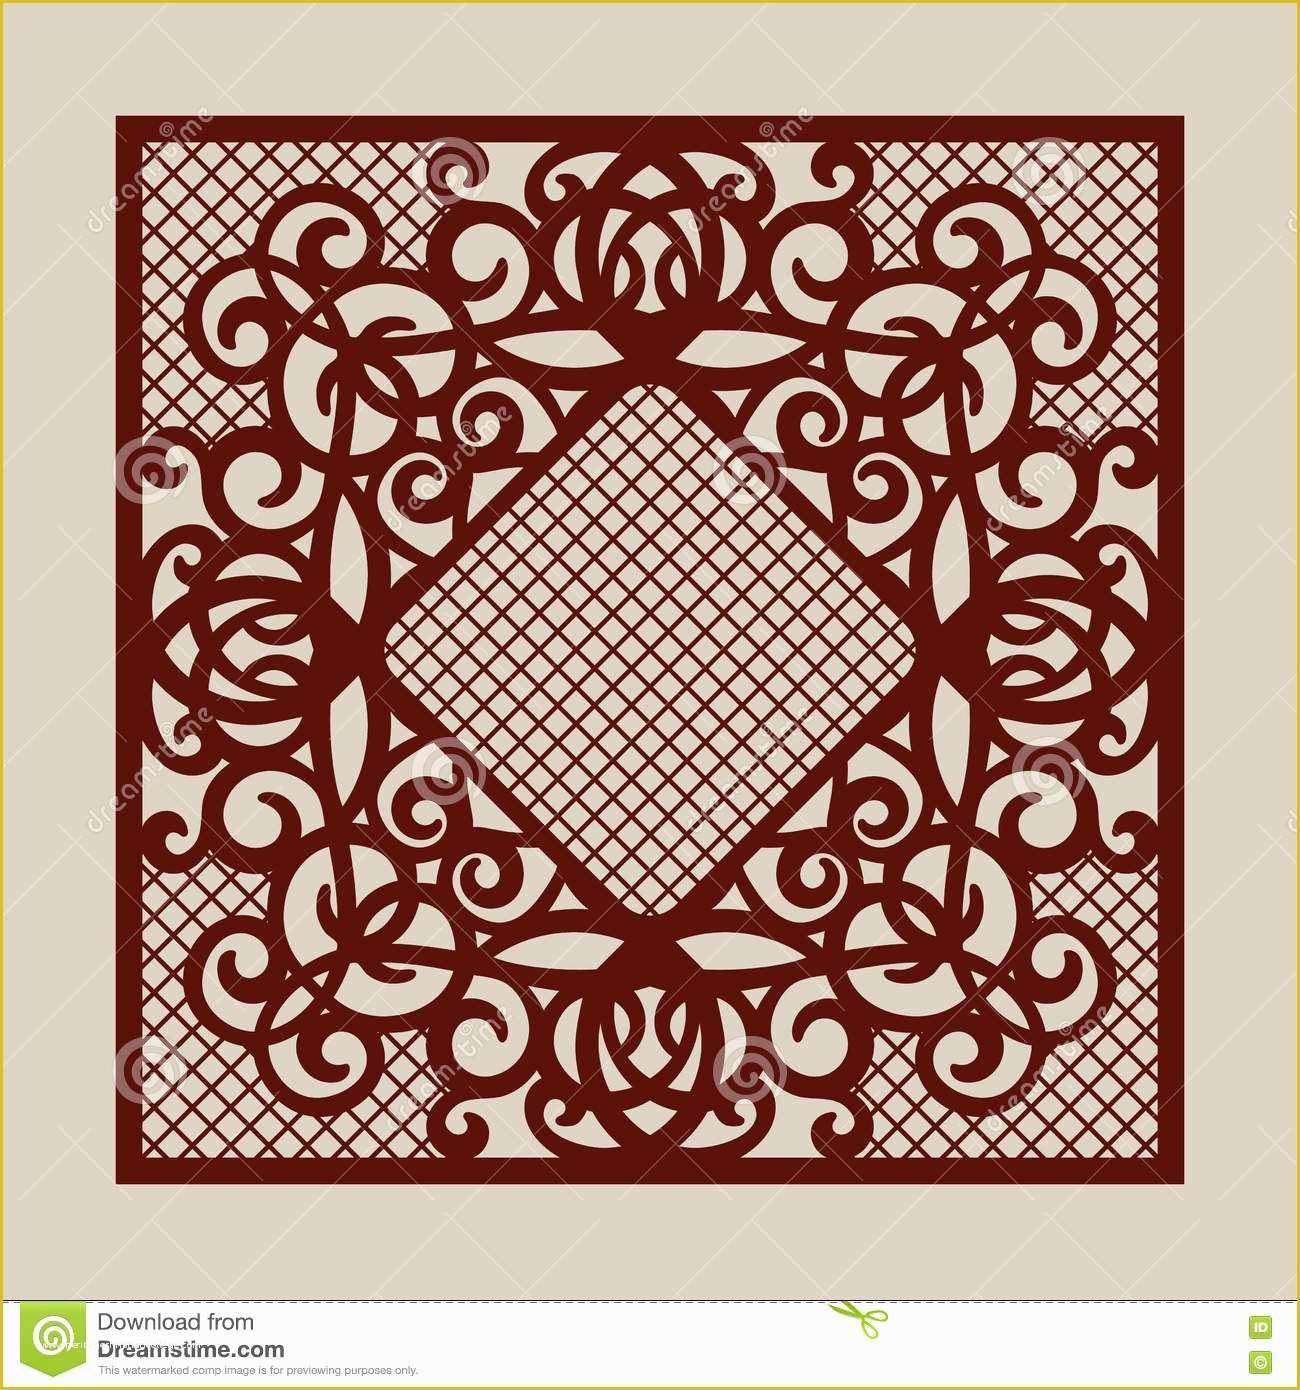 Free Laser Engraving Templates Of the Template Pattern for Laser Cutting Decorative Panel